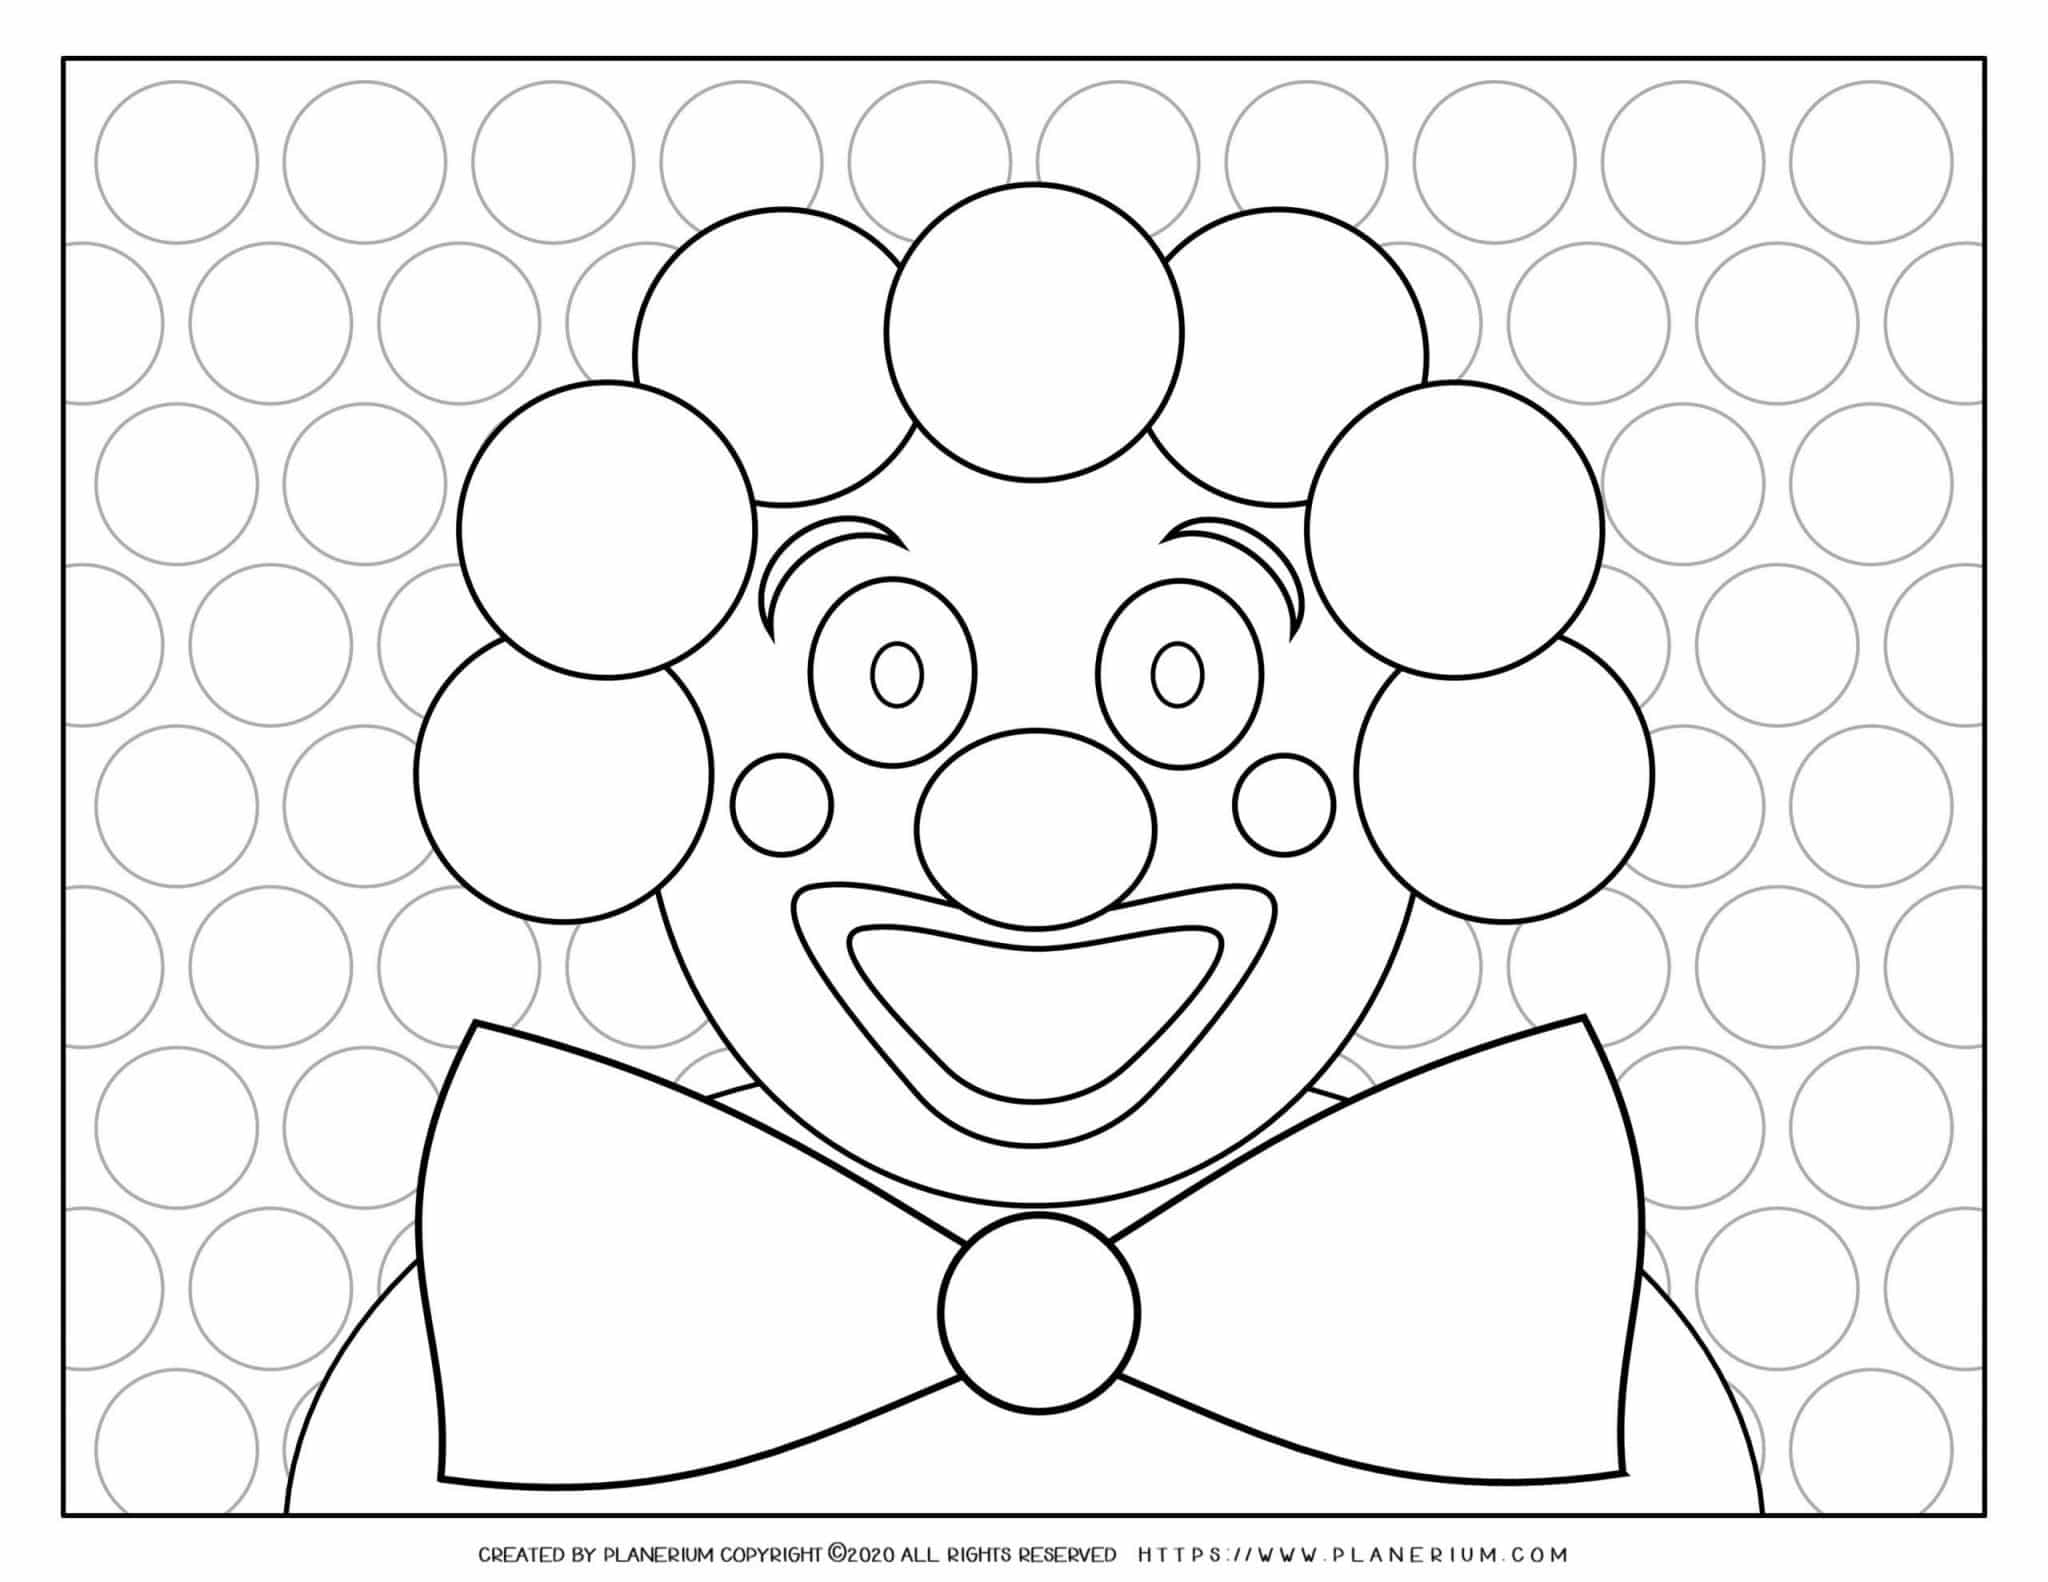 Carnival Coloring Page   Clown   Free Printable   Planerium